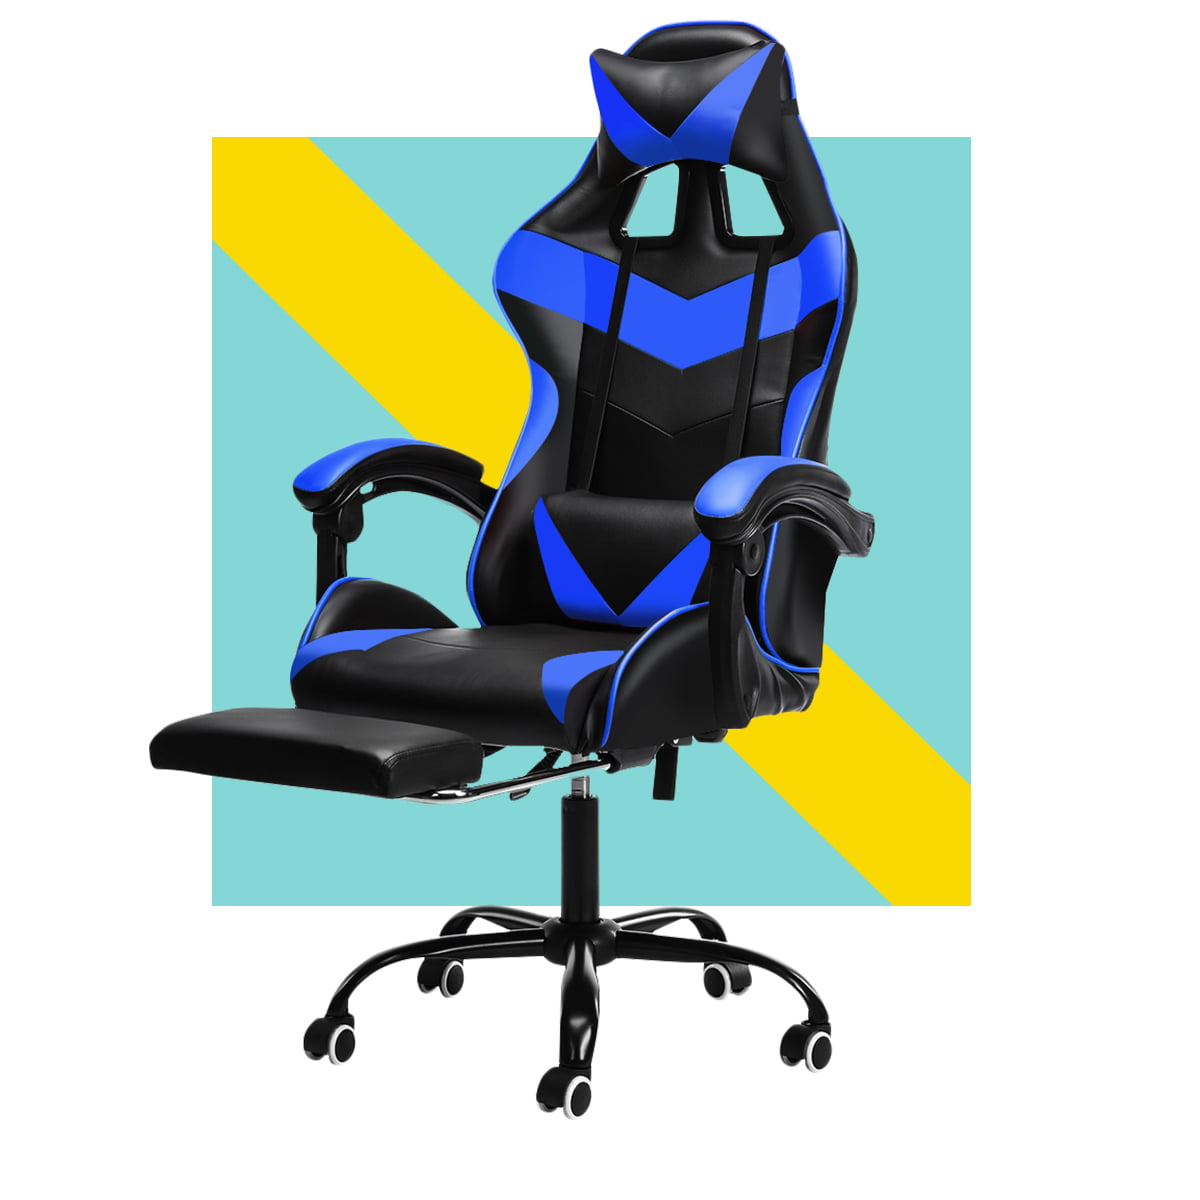 Furgle Office Chair Adjustable Reclining Gaming Chair Swivel High Back Ergonomic